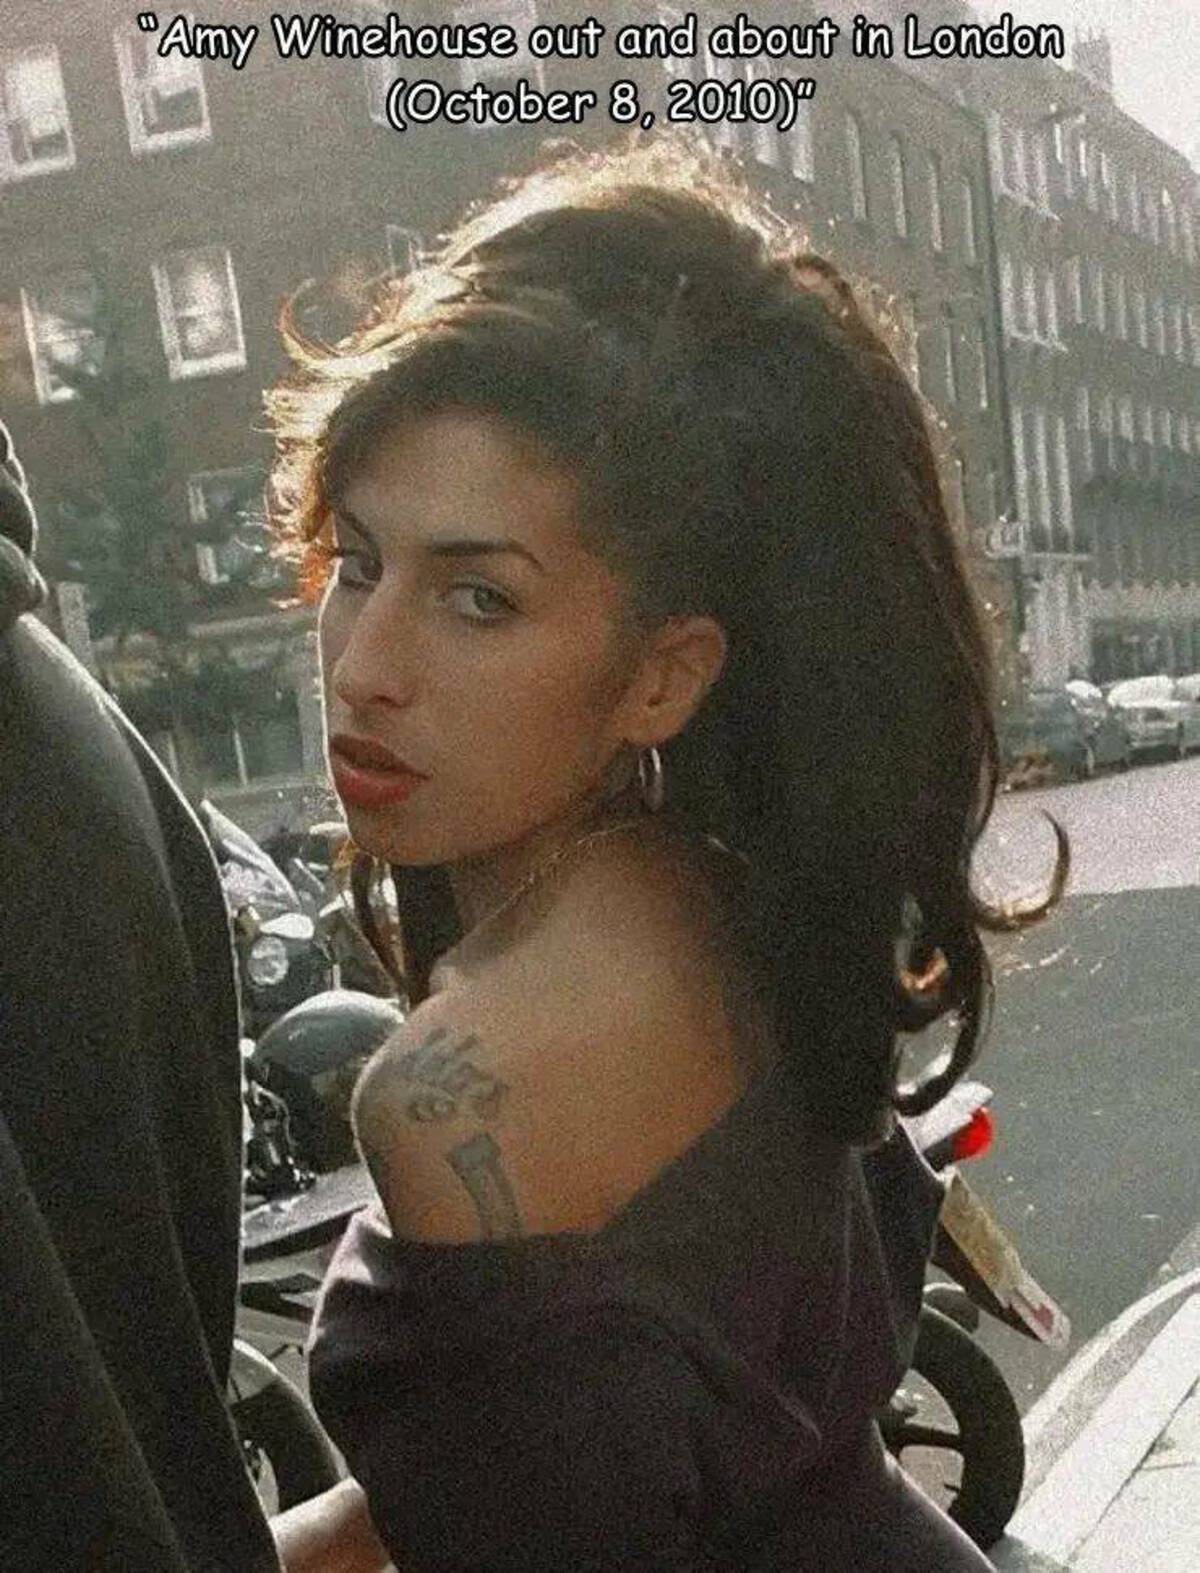 amy winehouse - "Amy Winehouse out and about in London "